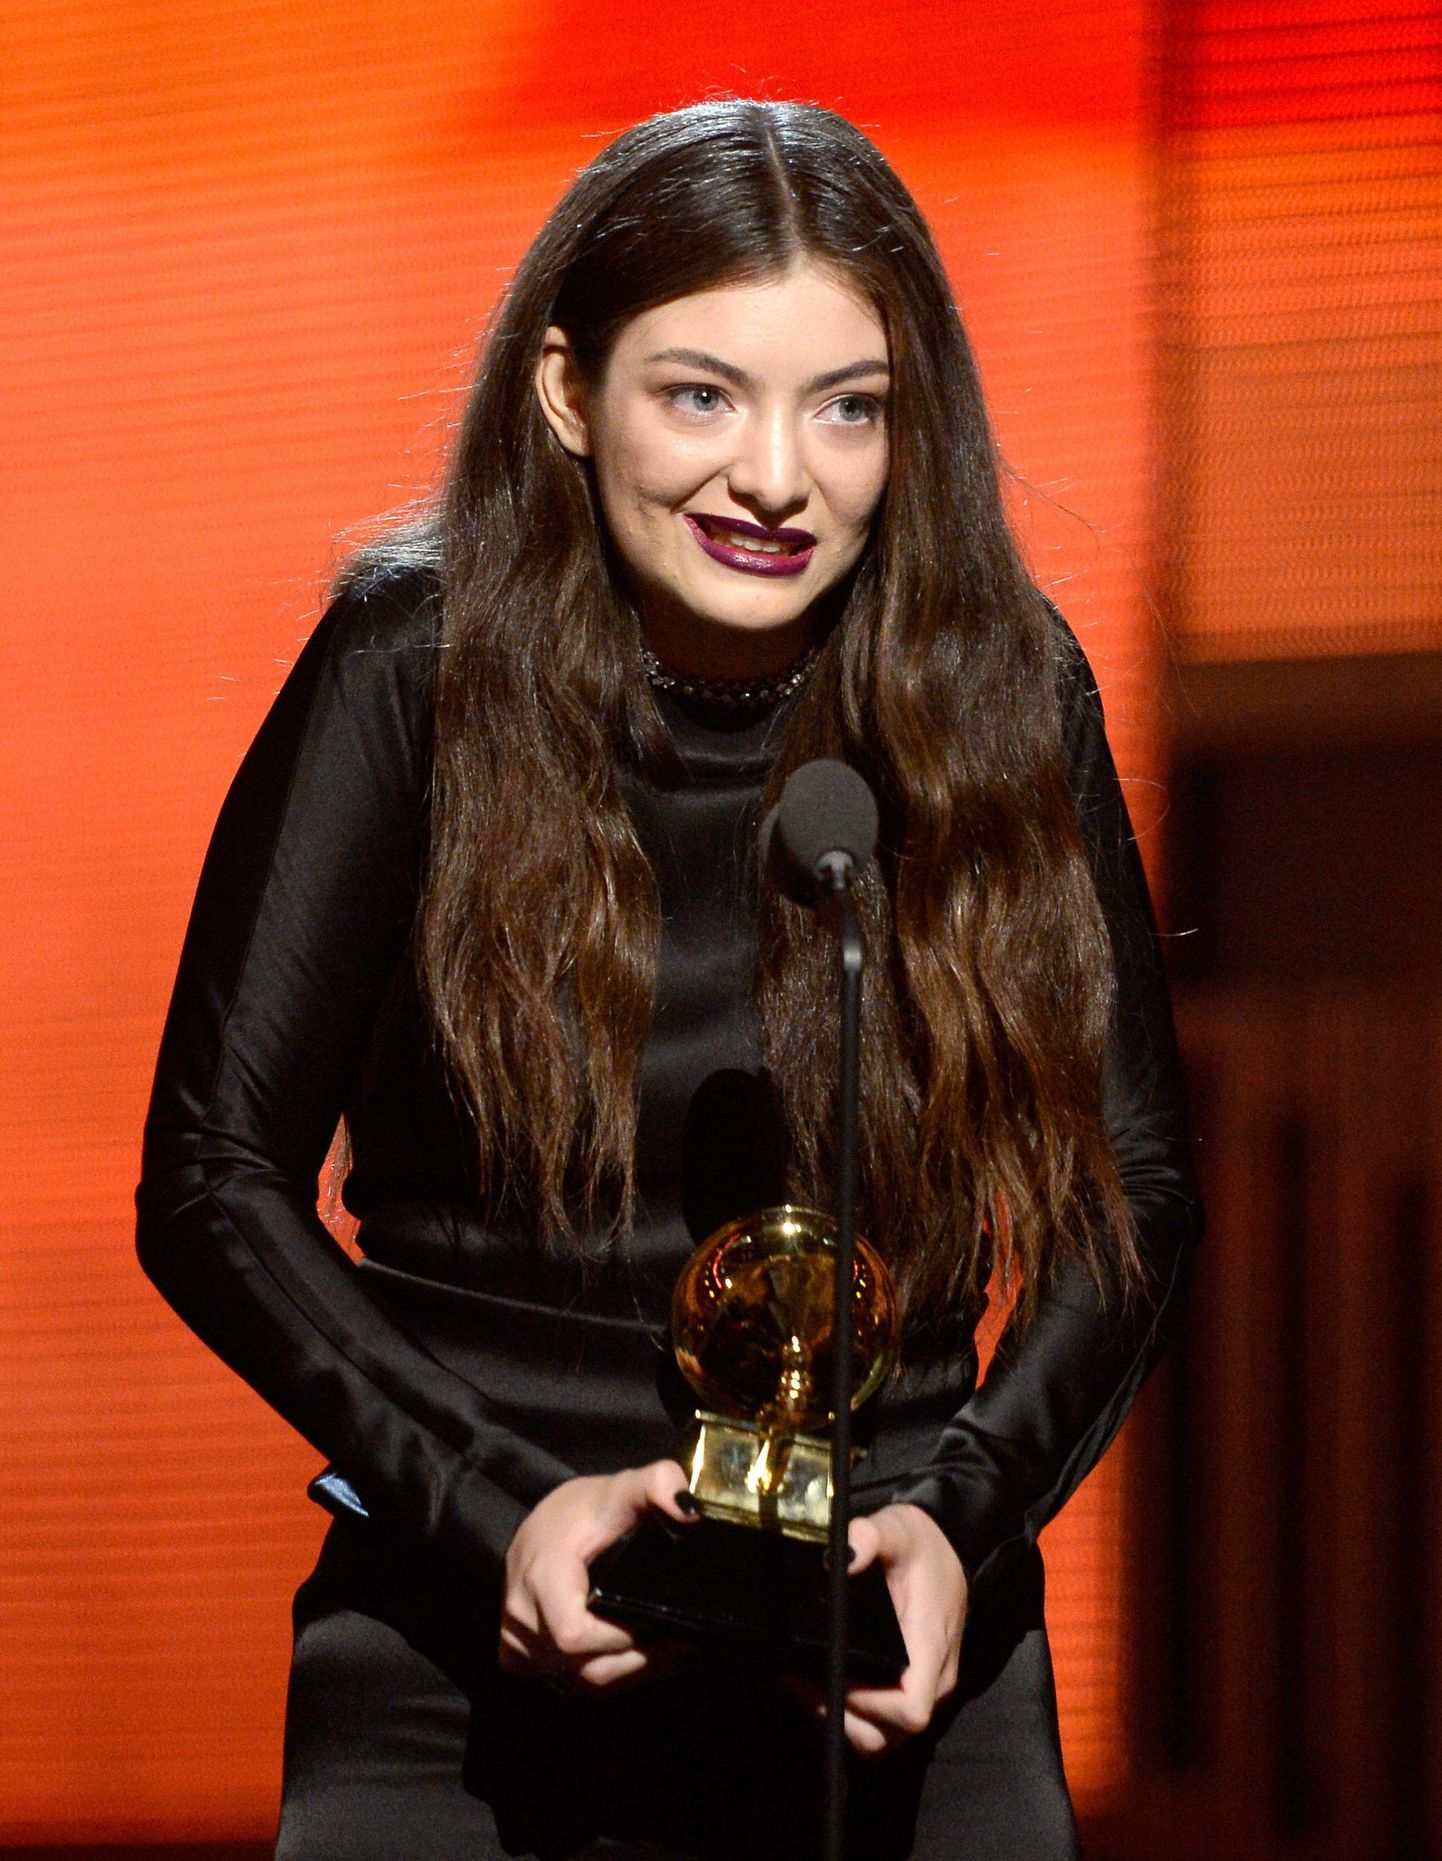 LOS ANGELES, CA - JANUARY 26: Singer Lorde accepts the Best Pop Solo Performance award for 'Royals' onstage during the 56th GRAMMY Awards at Staples Center on January 26, 2014 in Los Angeles, California.   Kevork Djansezian/Getty Images/AFP
== FOR NEWSPAPERS, INTERNET, TELCOS & TELEVISION USE ONLY ==